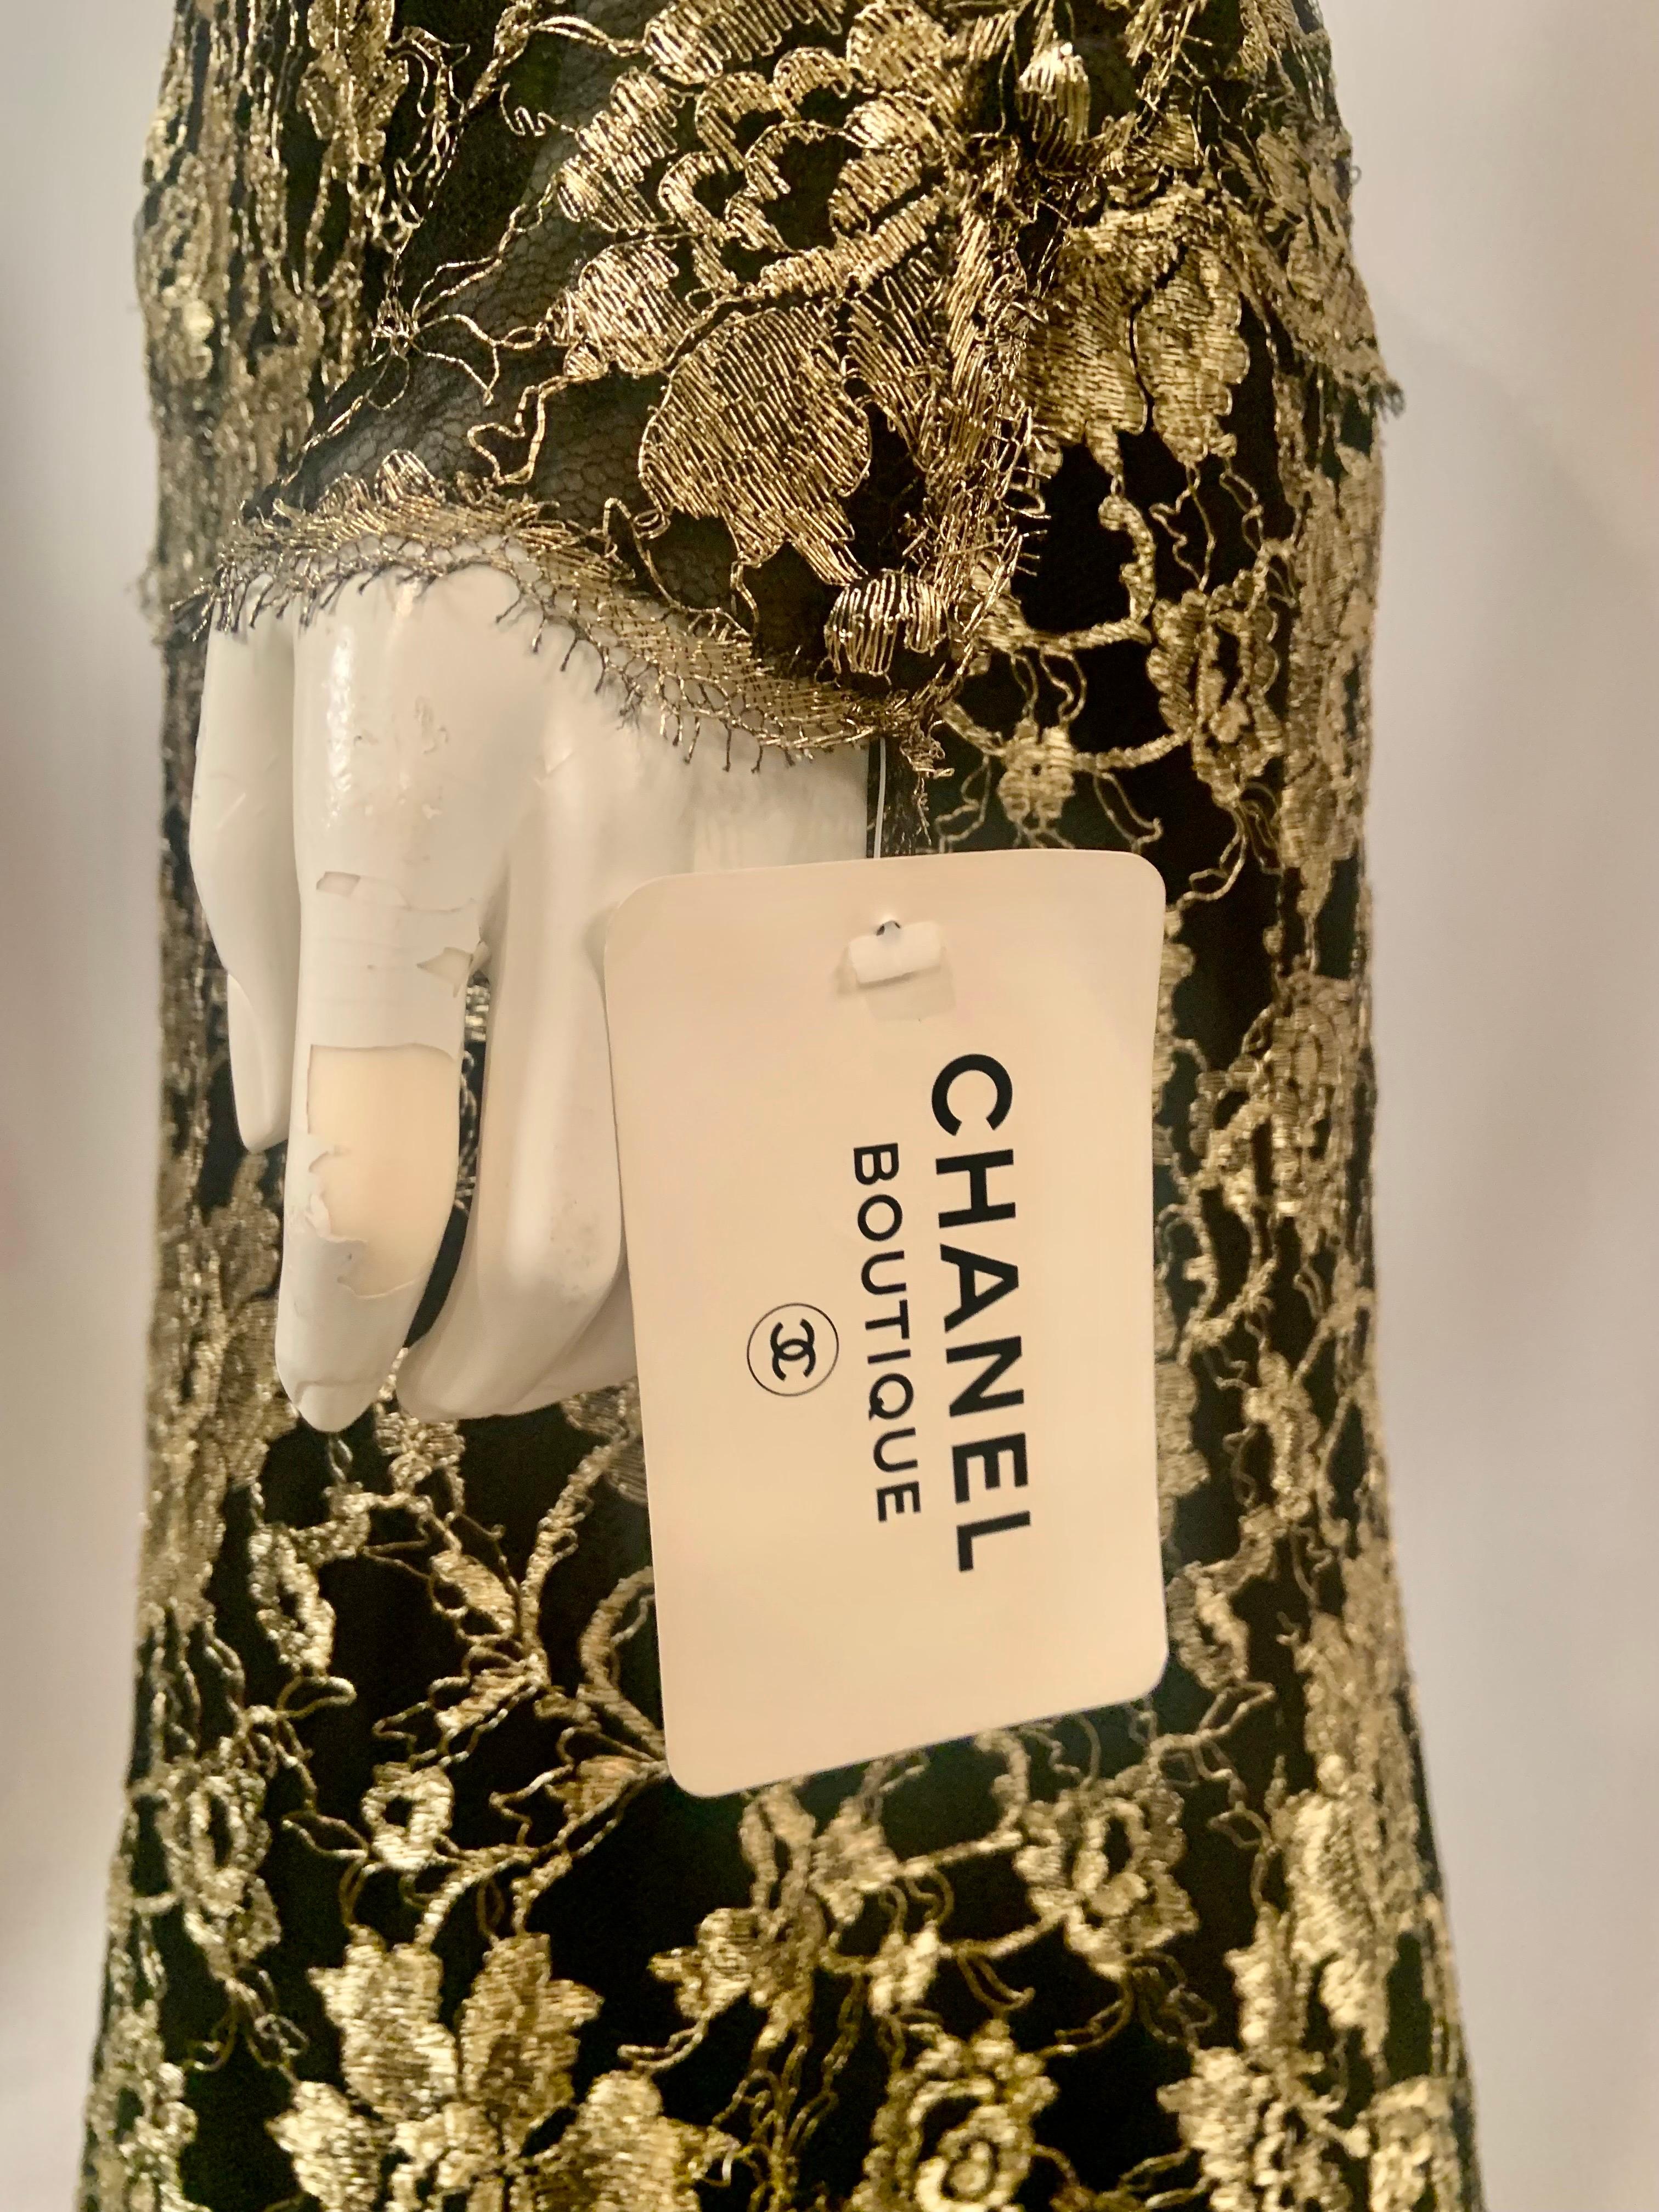 1986 Chanel by Karl Lagerfeld Gold and Black Lace Gown with Train Original Tag For Sale 13